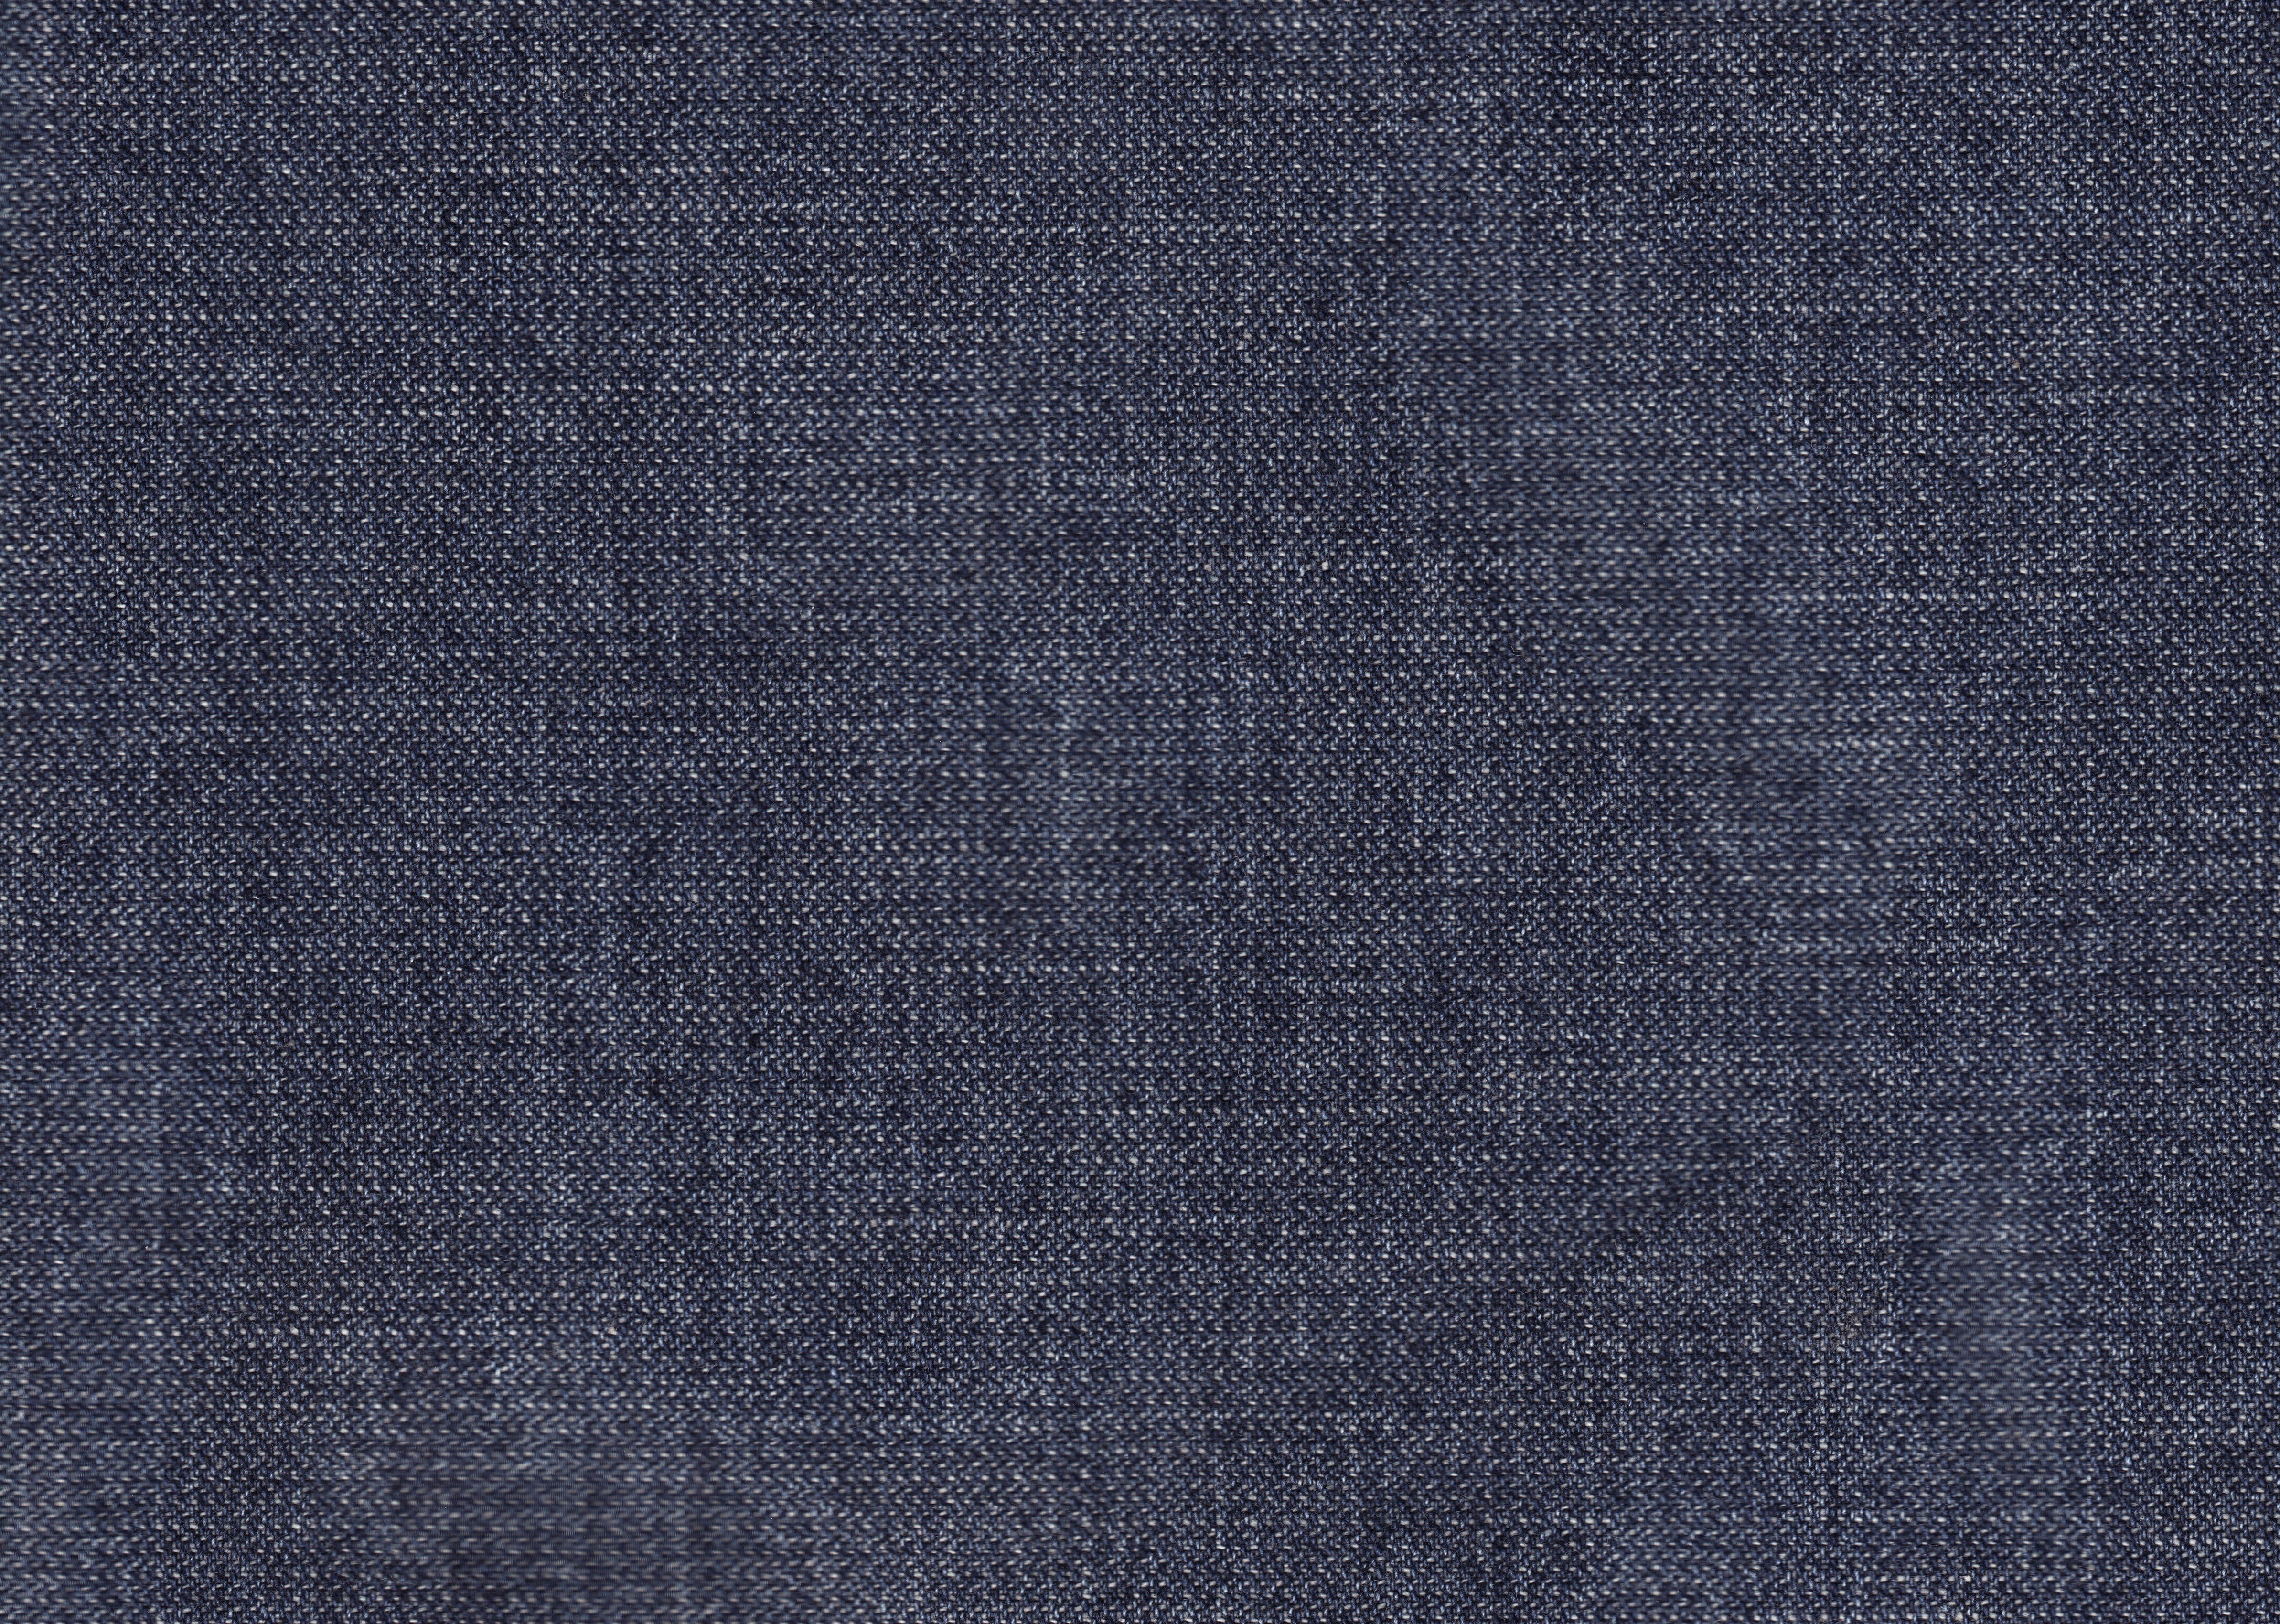 surface, grid, lines, dark, backgrounds, textile, pattern, material